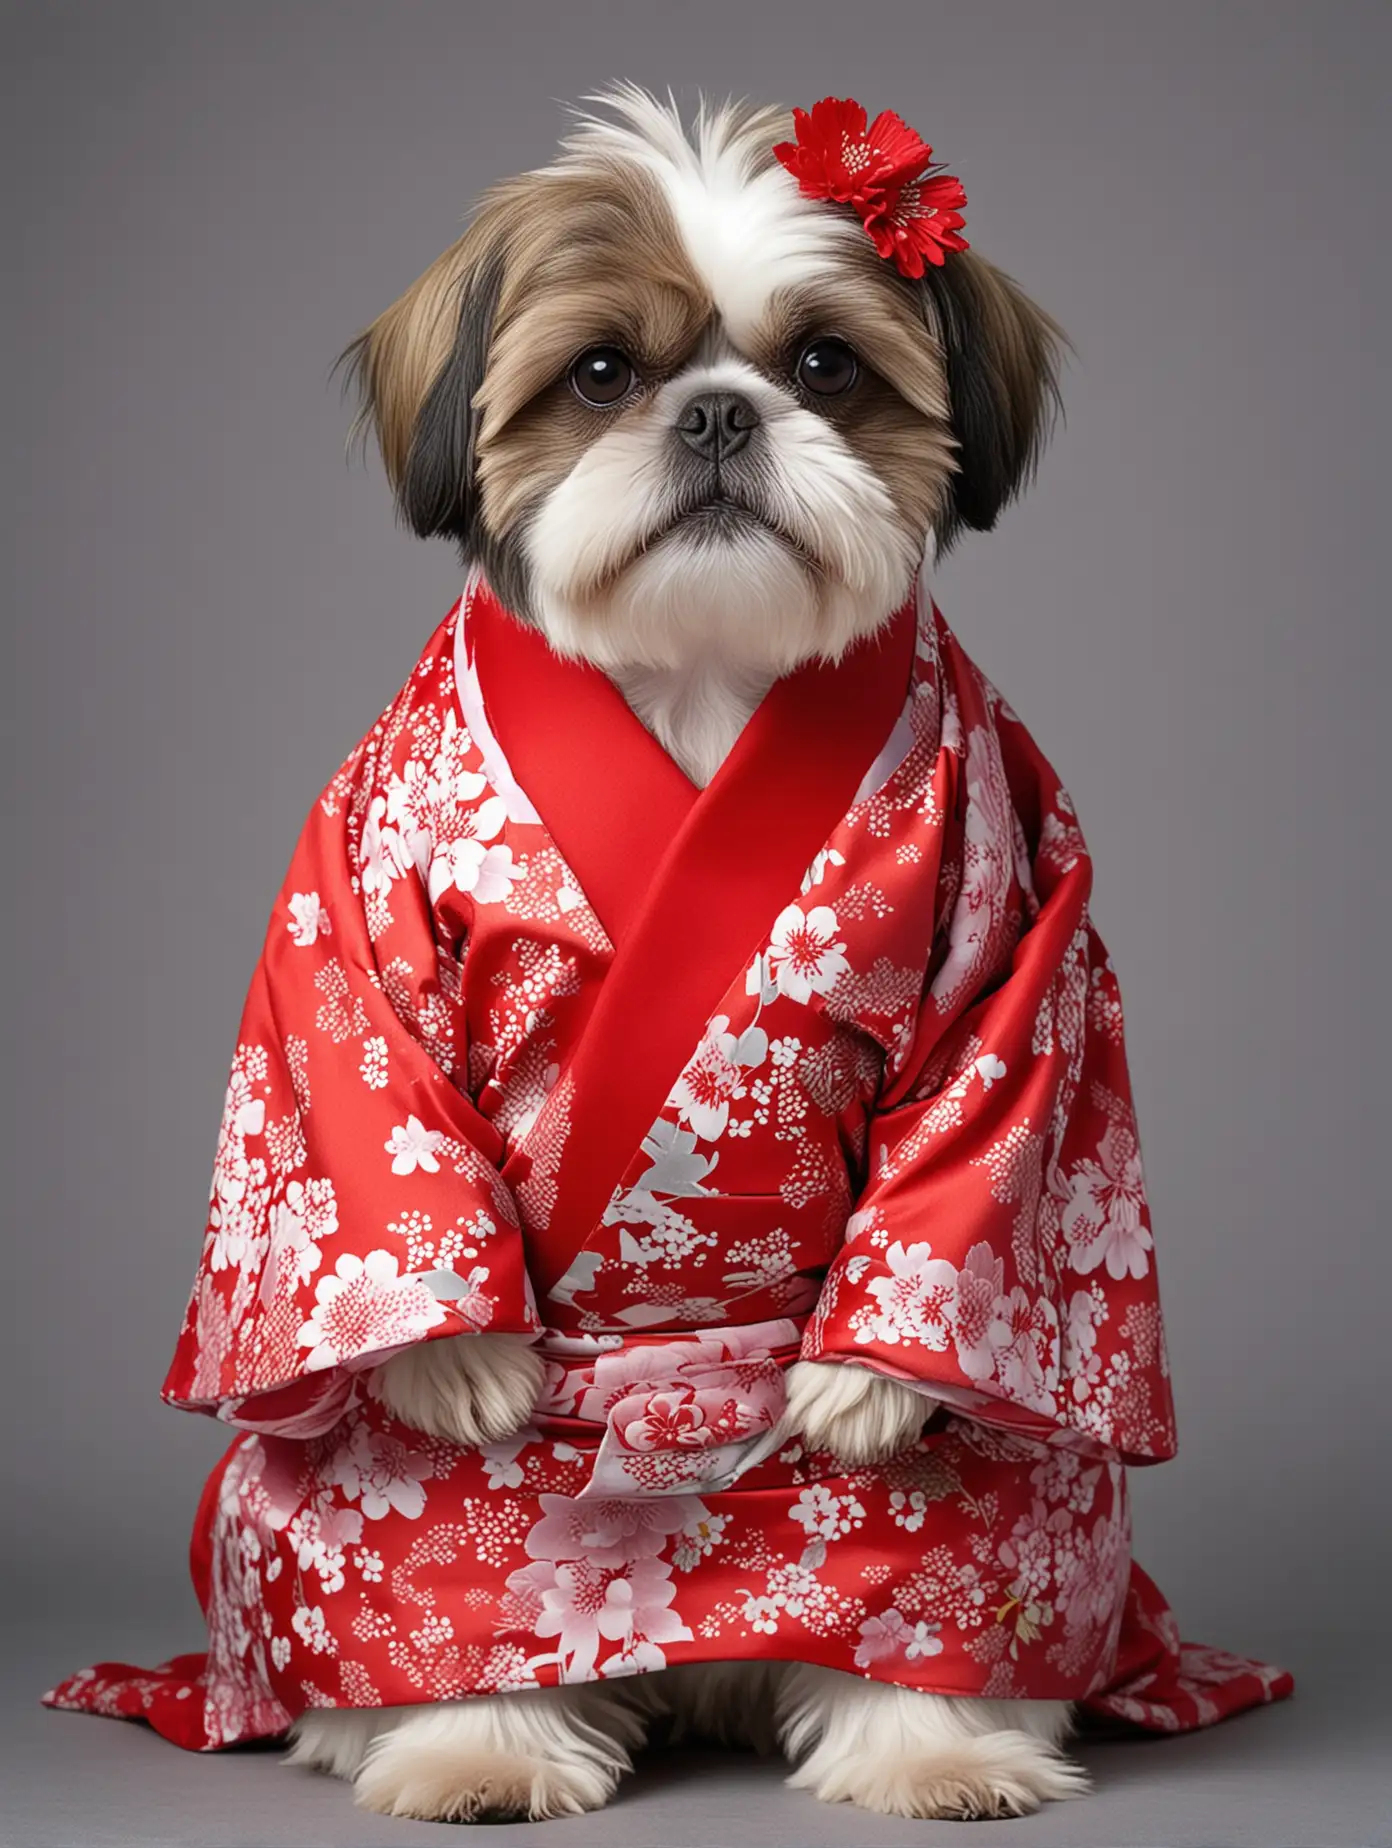 Shih Tzu in Traditional Red Japanese Attire on Grey Background